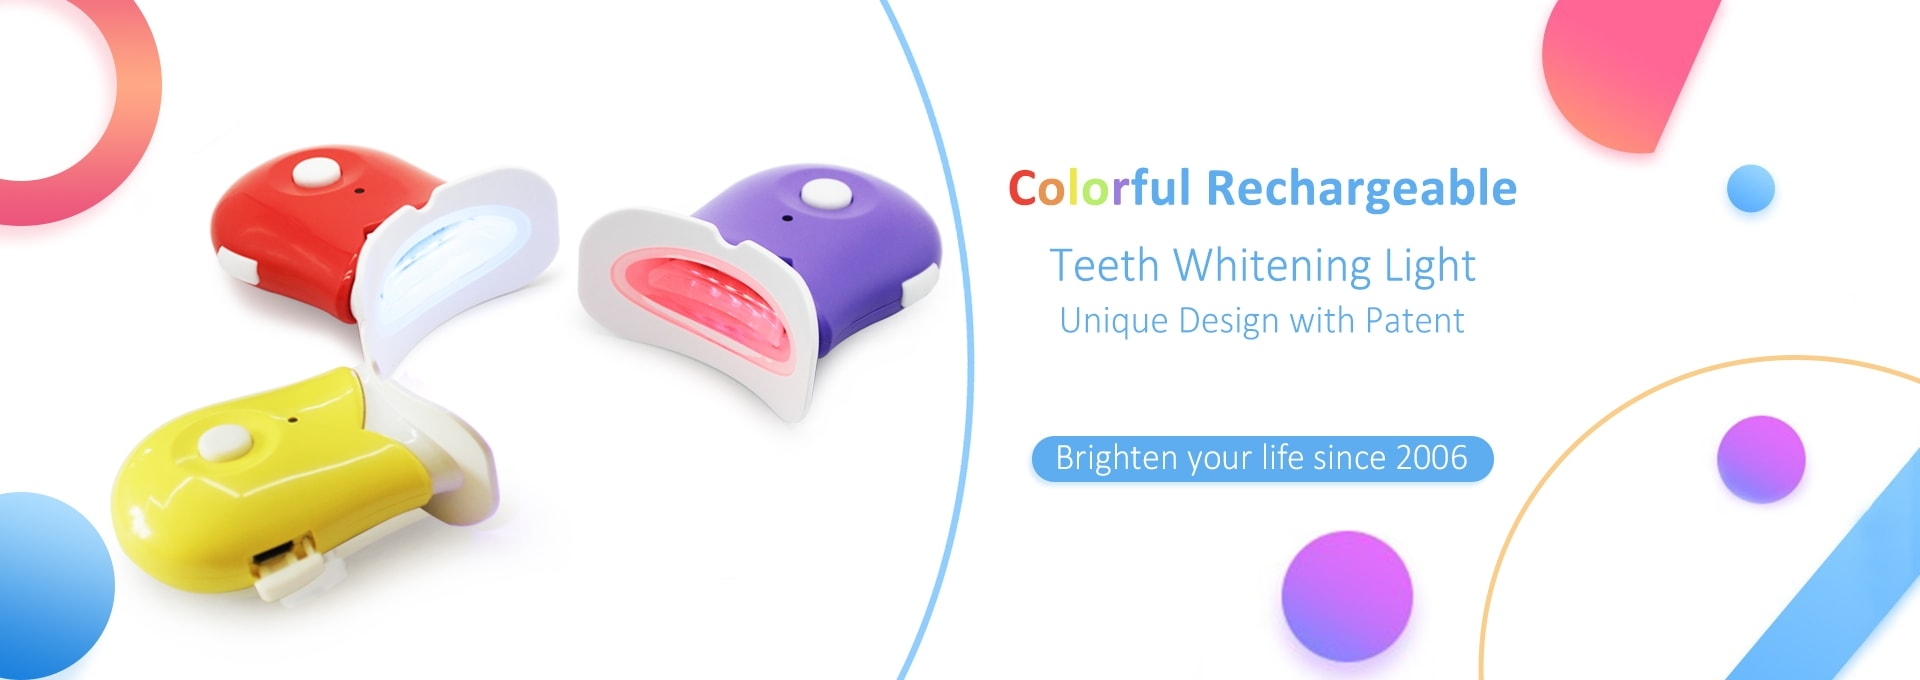 Blue and Red Led Teeth Whitening Light